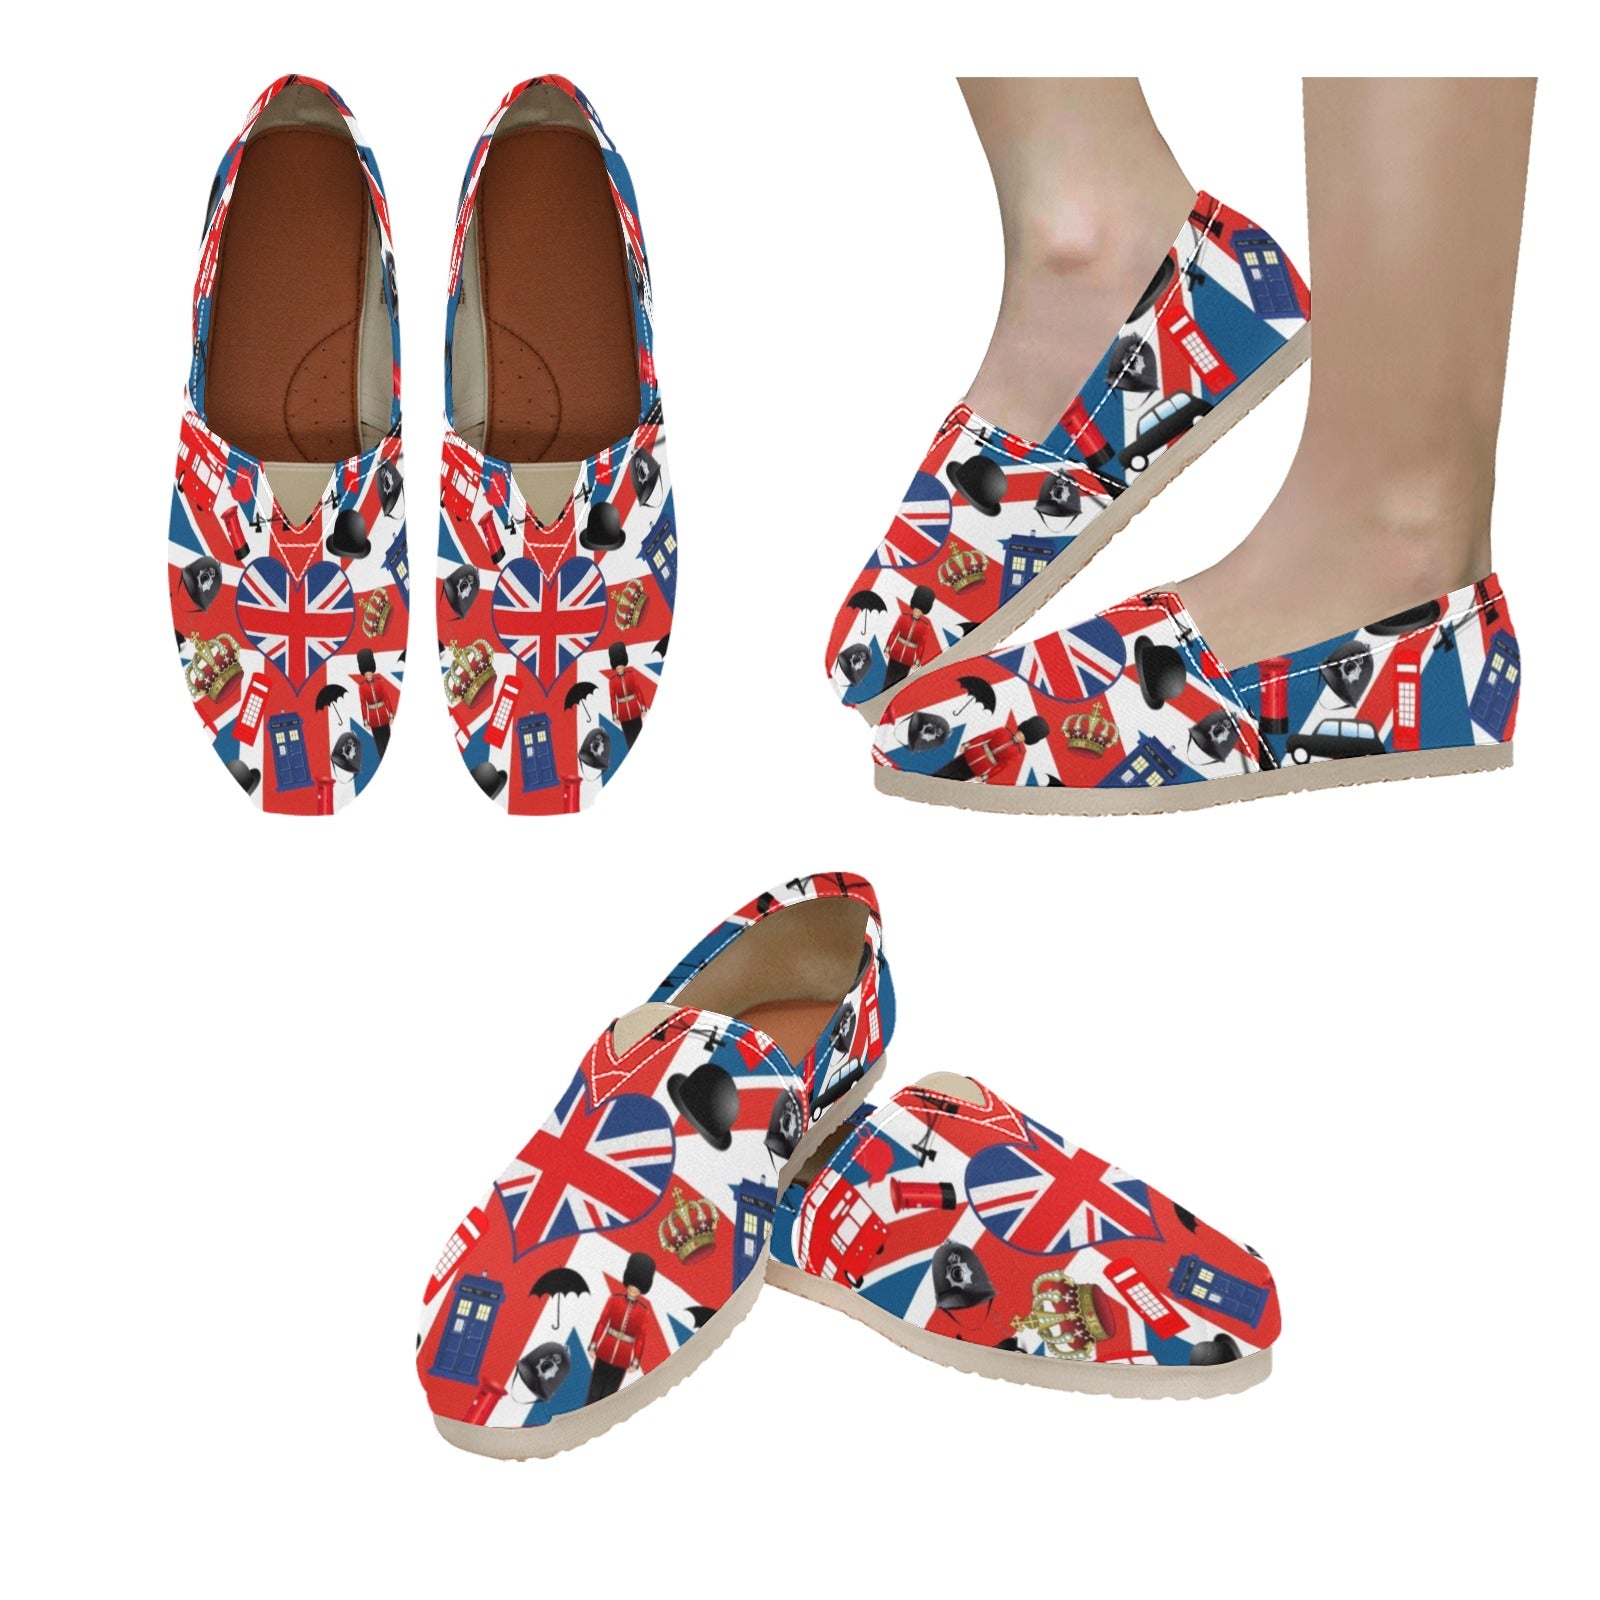 London - Casual Canvas Slip-on Shoes